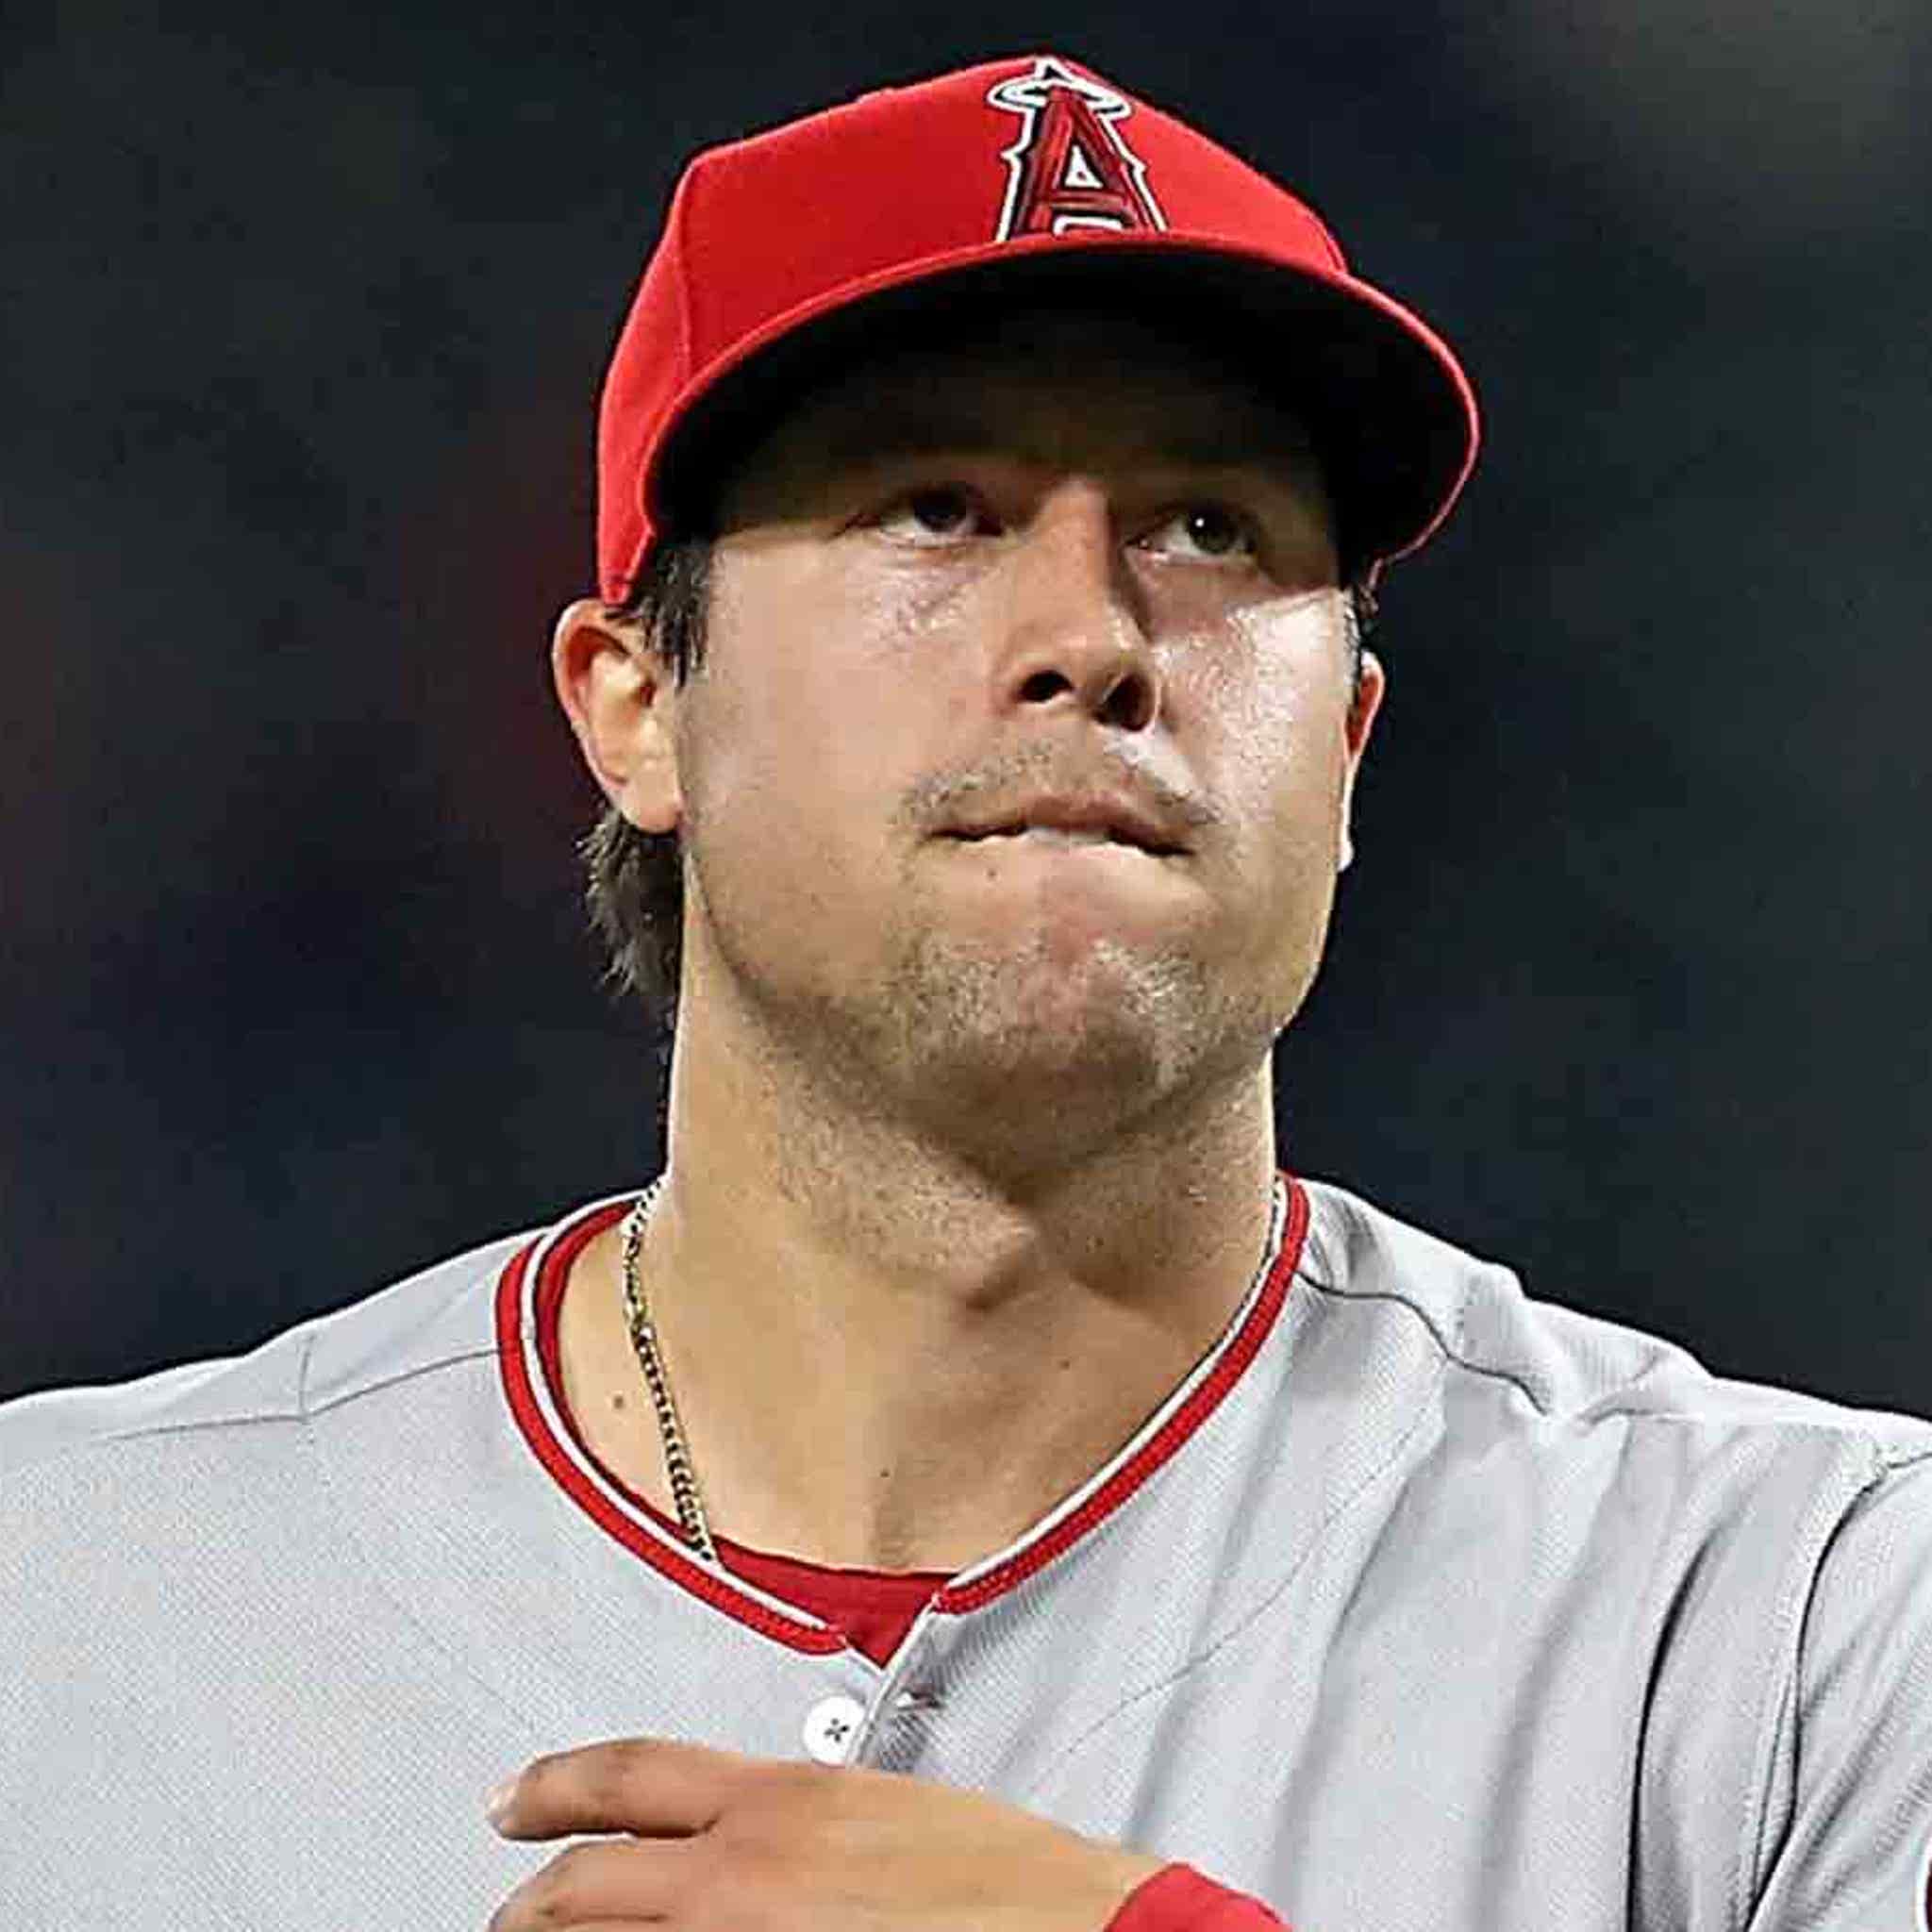 Tyler Skaggs Funeral Set for Today, Angels Expected to Attend